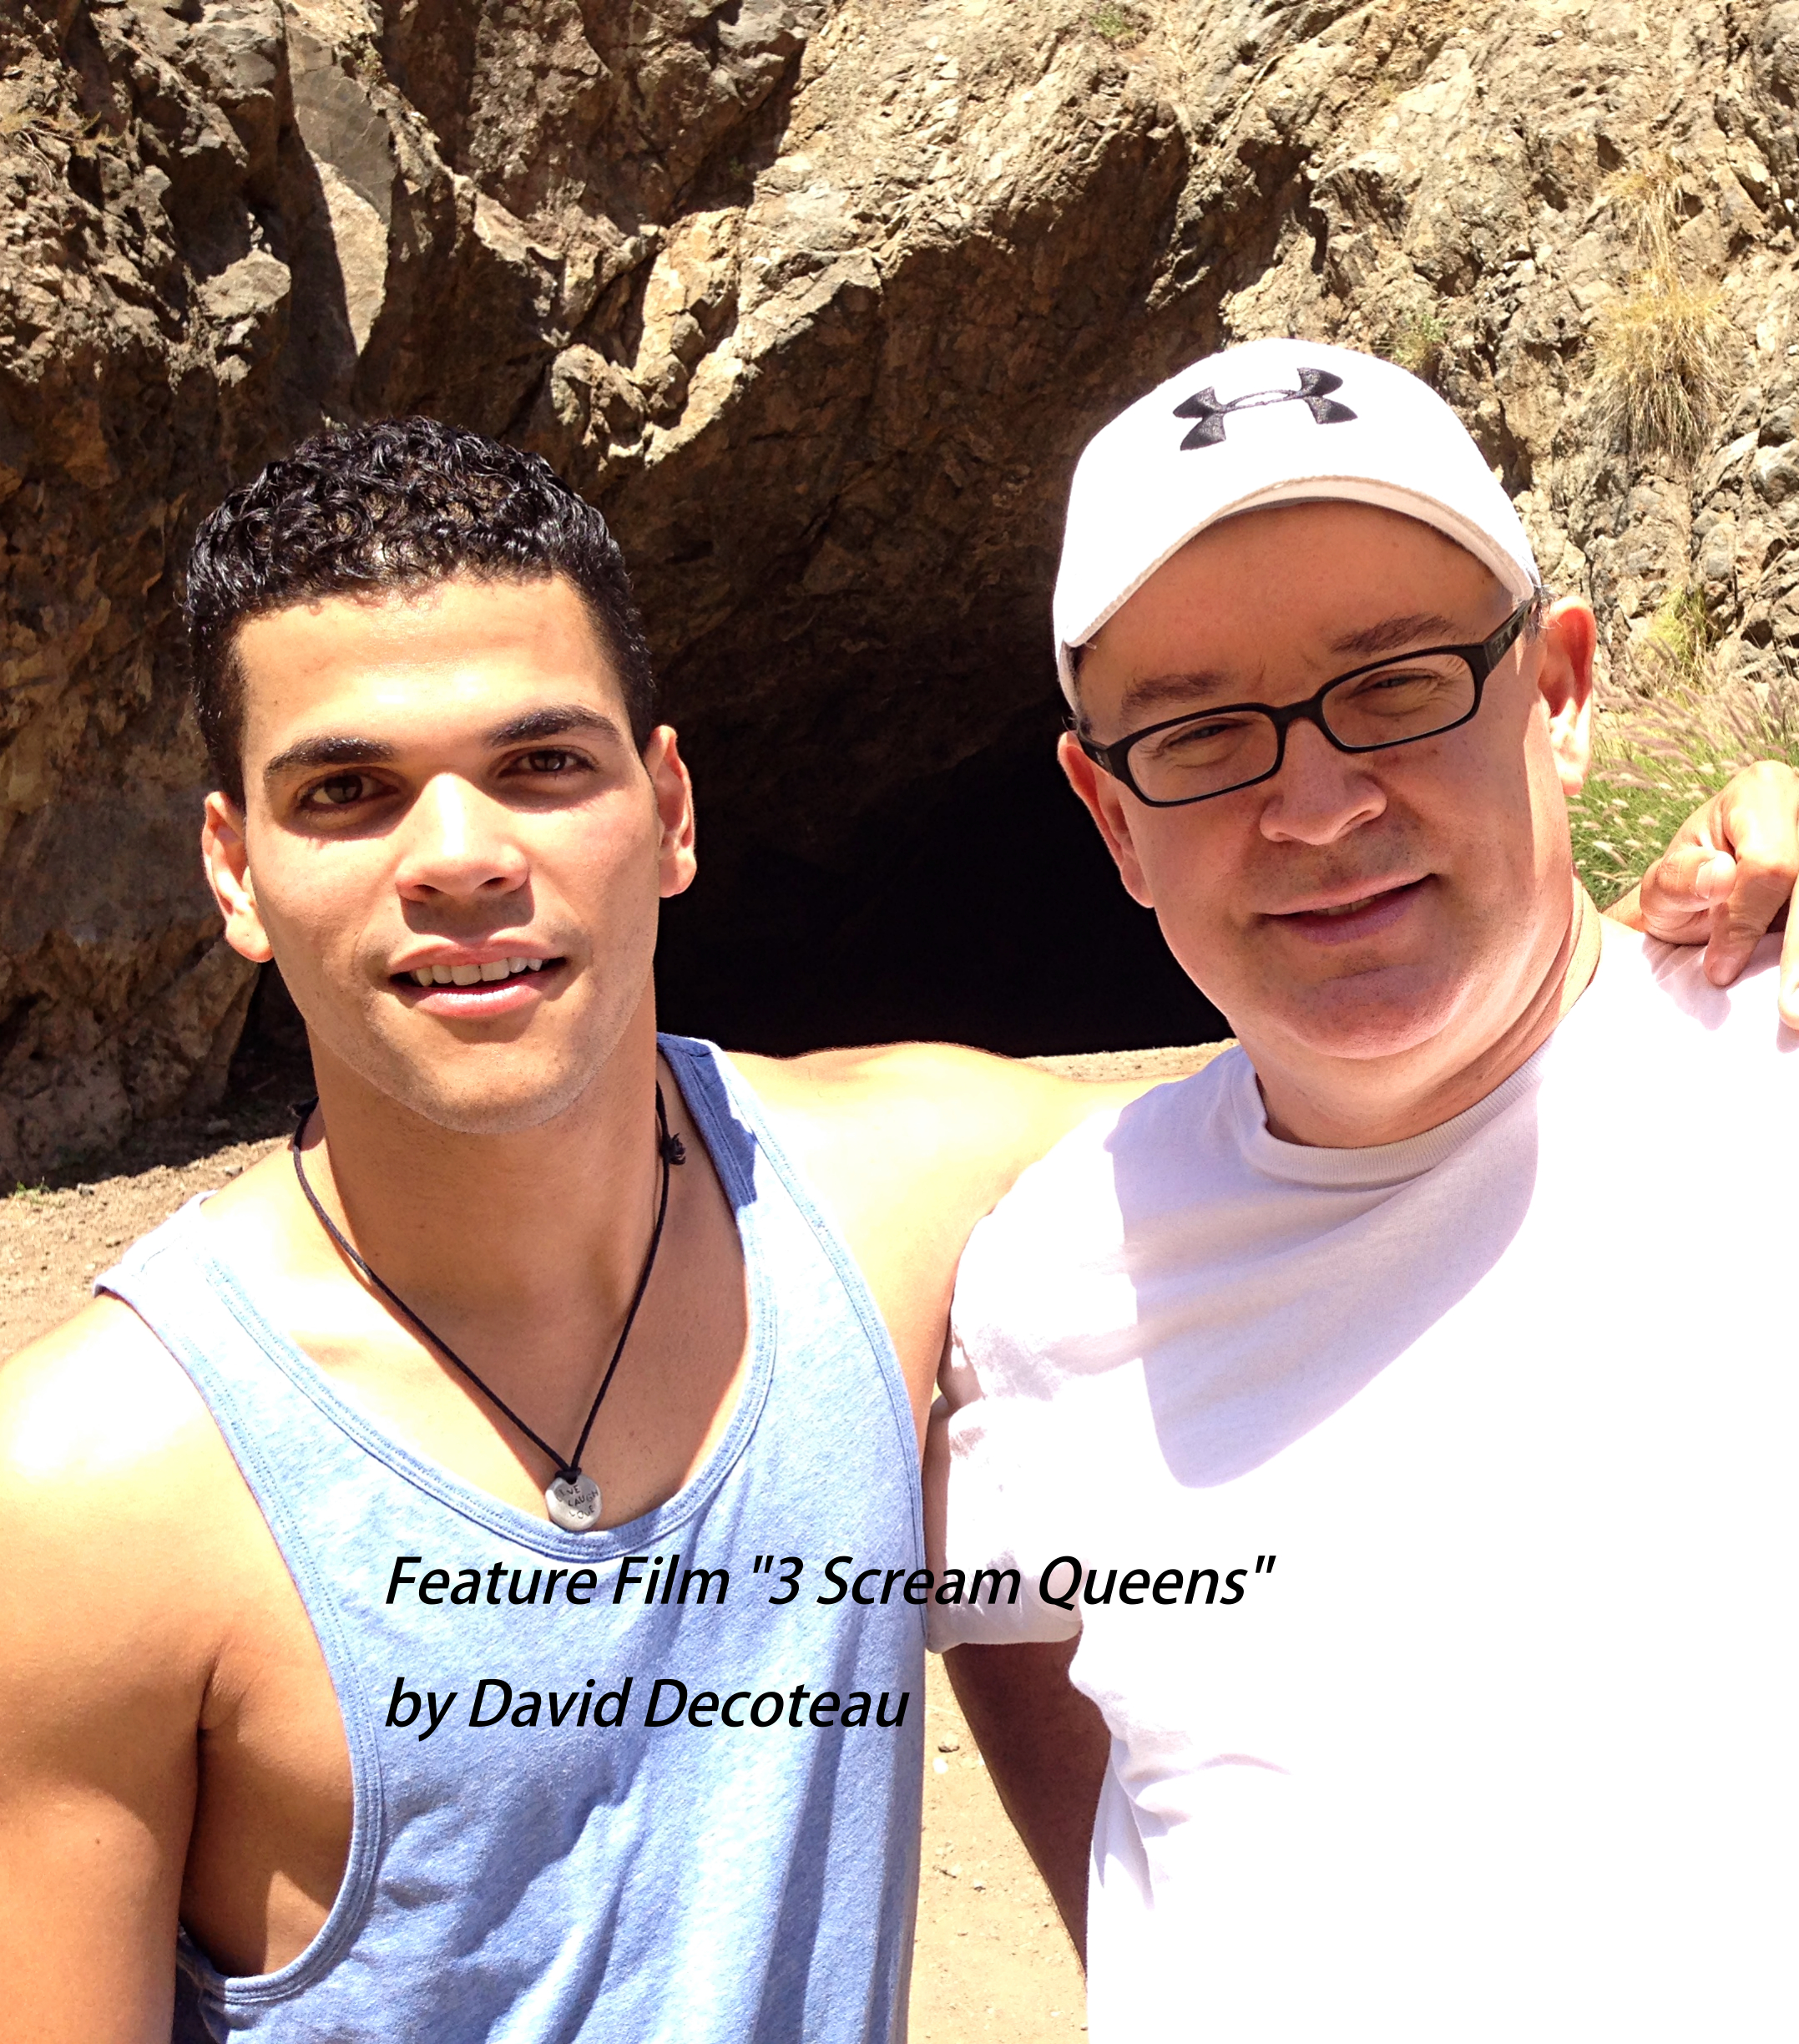 Feature Film: 3 Scream Queens Directed by David Decoteau (On Set)